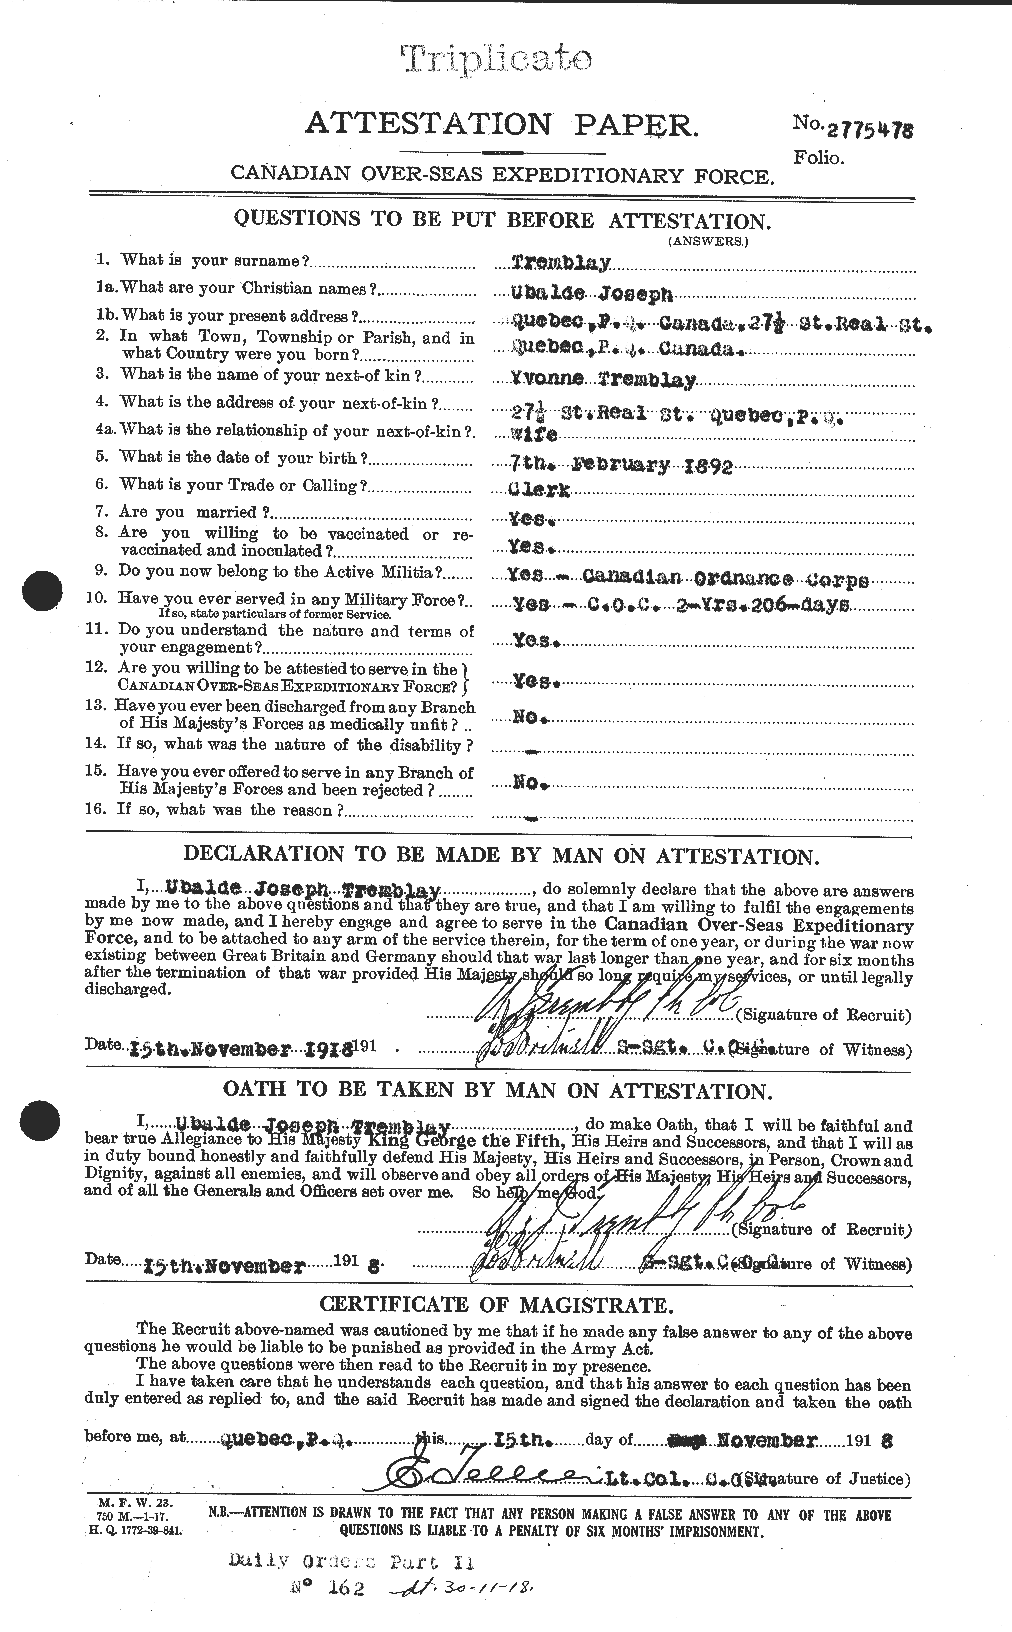 Personnel Records of the First World War - CEF 638328a